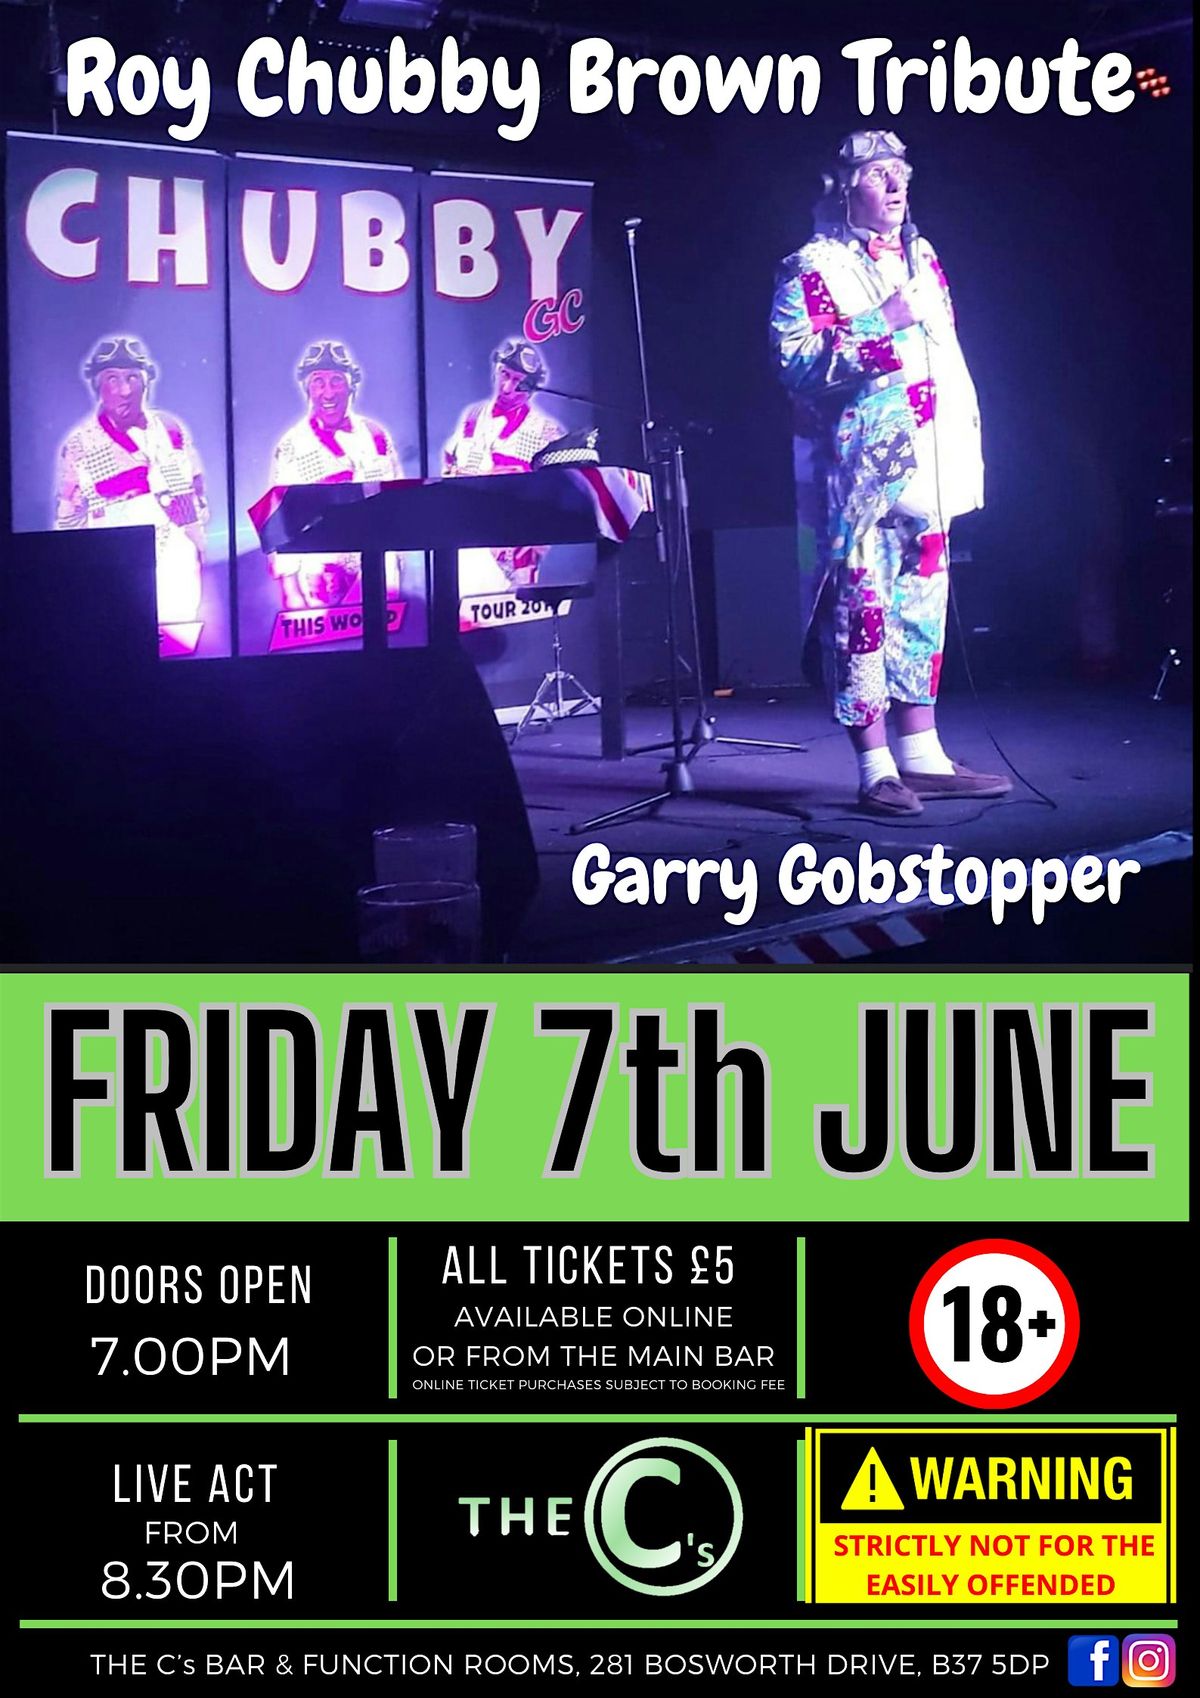 Roy Chubby Brown Tribute - Gary Gobstopper at The SJB